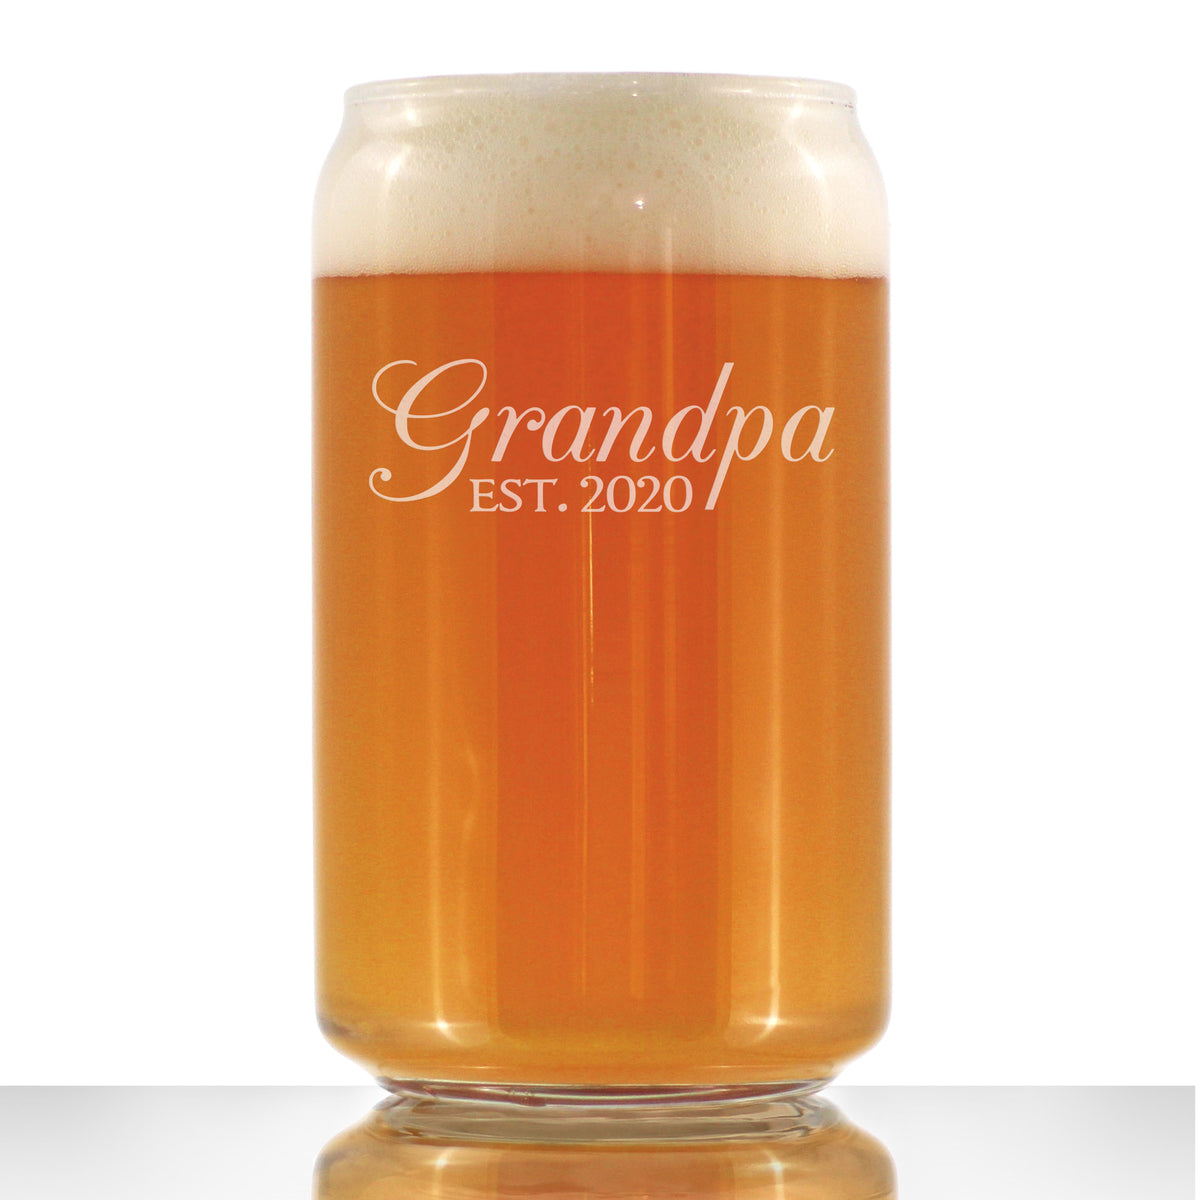 Grandpa Est 2020 - New Grandfather Beer Can Pint Glass Gift for First Time Grandparents - Decorative 16 Oz Glasses